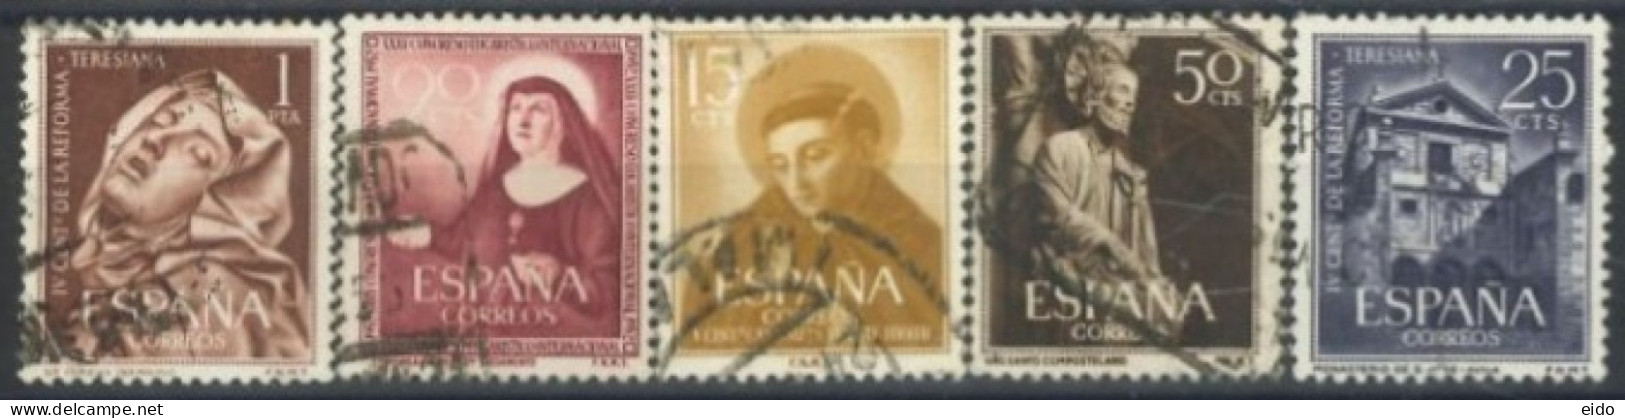 SPAIN, 1952/62, STAMPS SET OF 5, USED. - Gebraucht